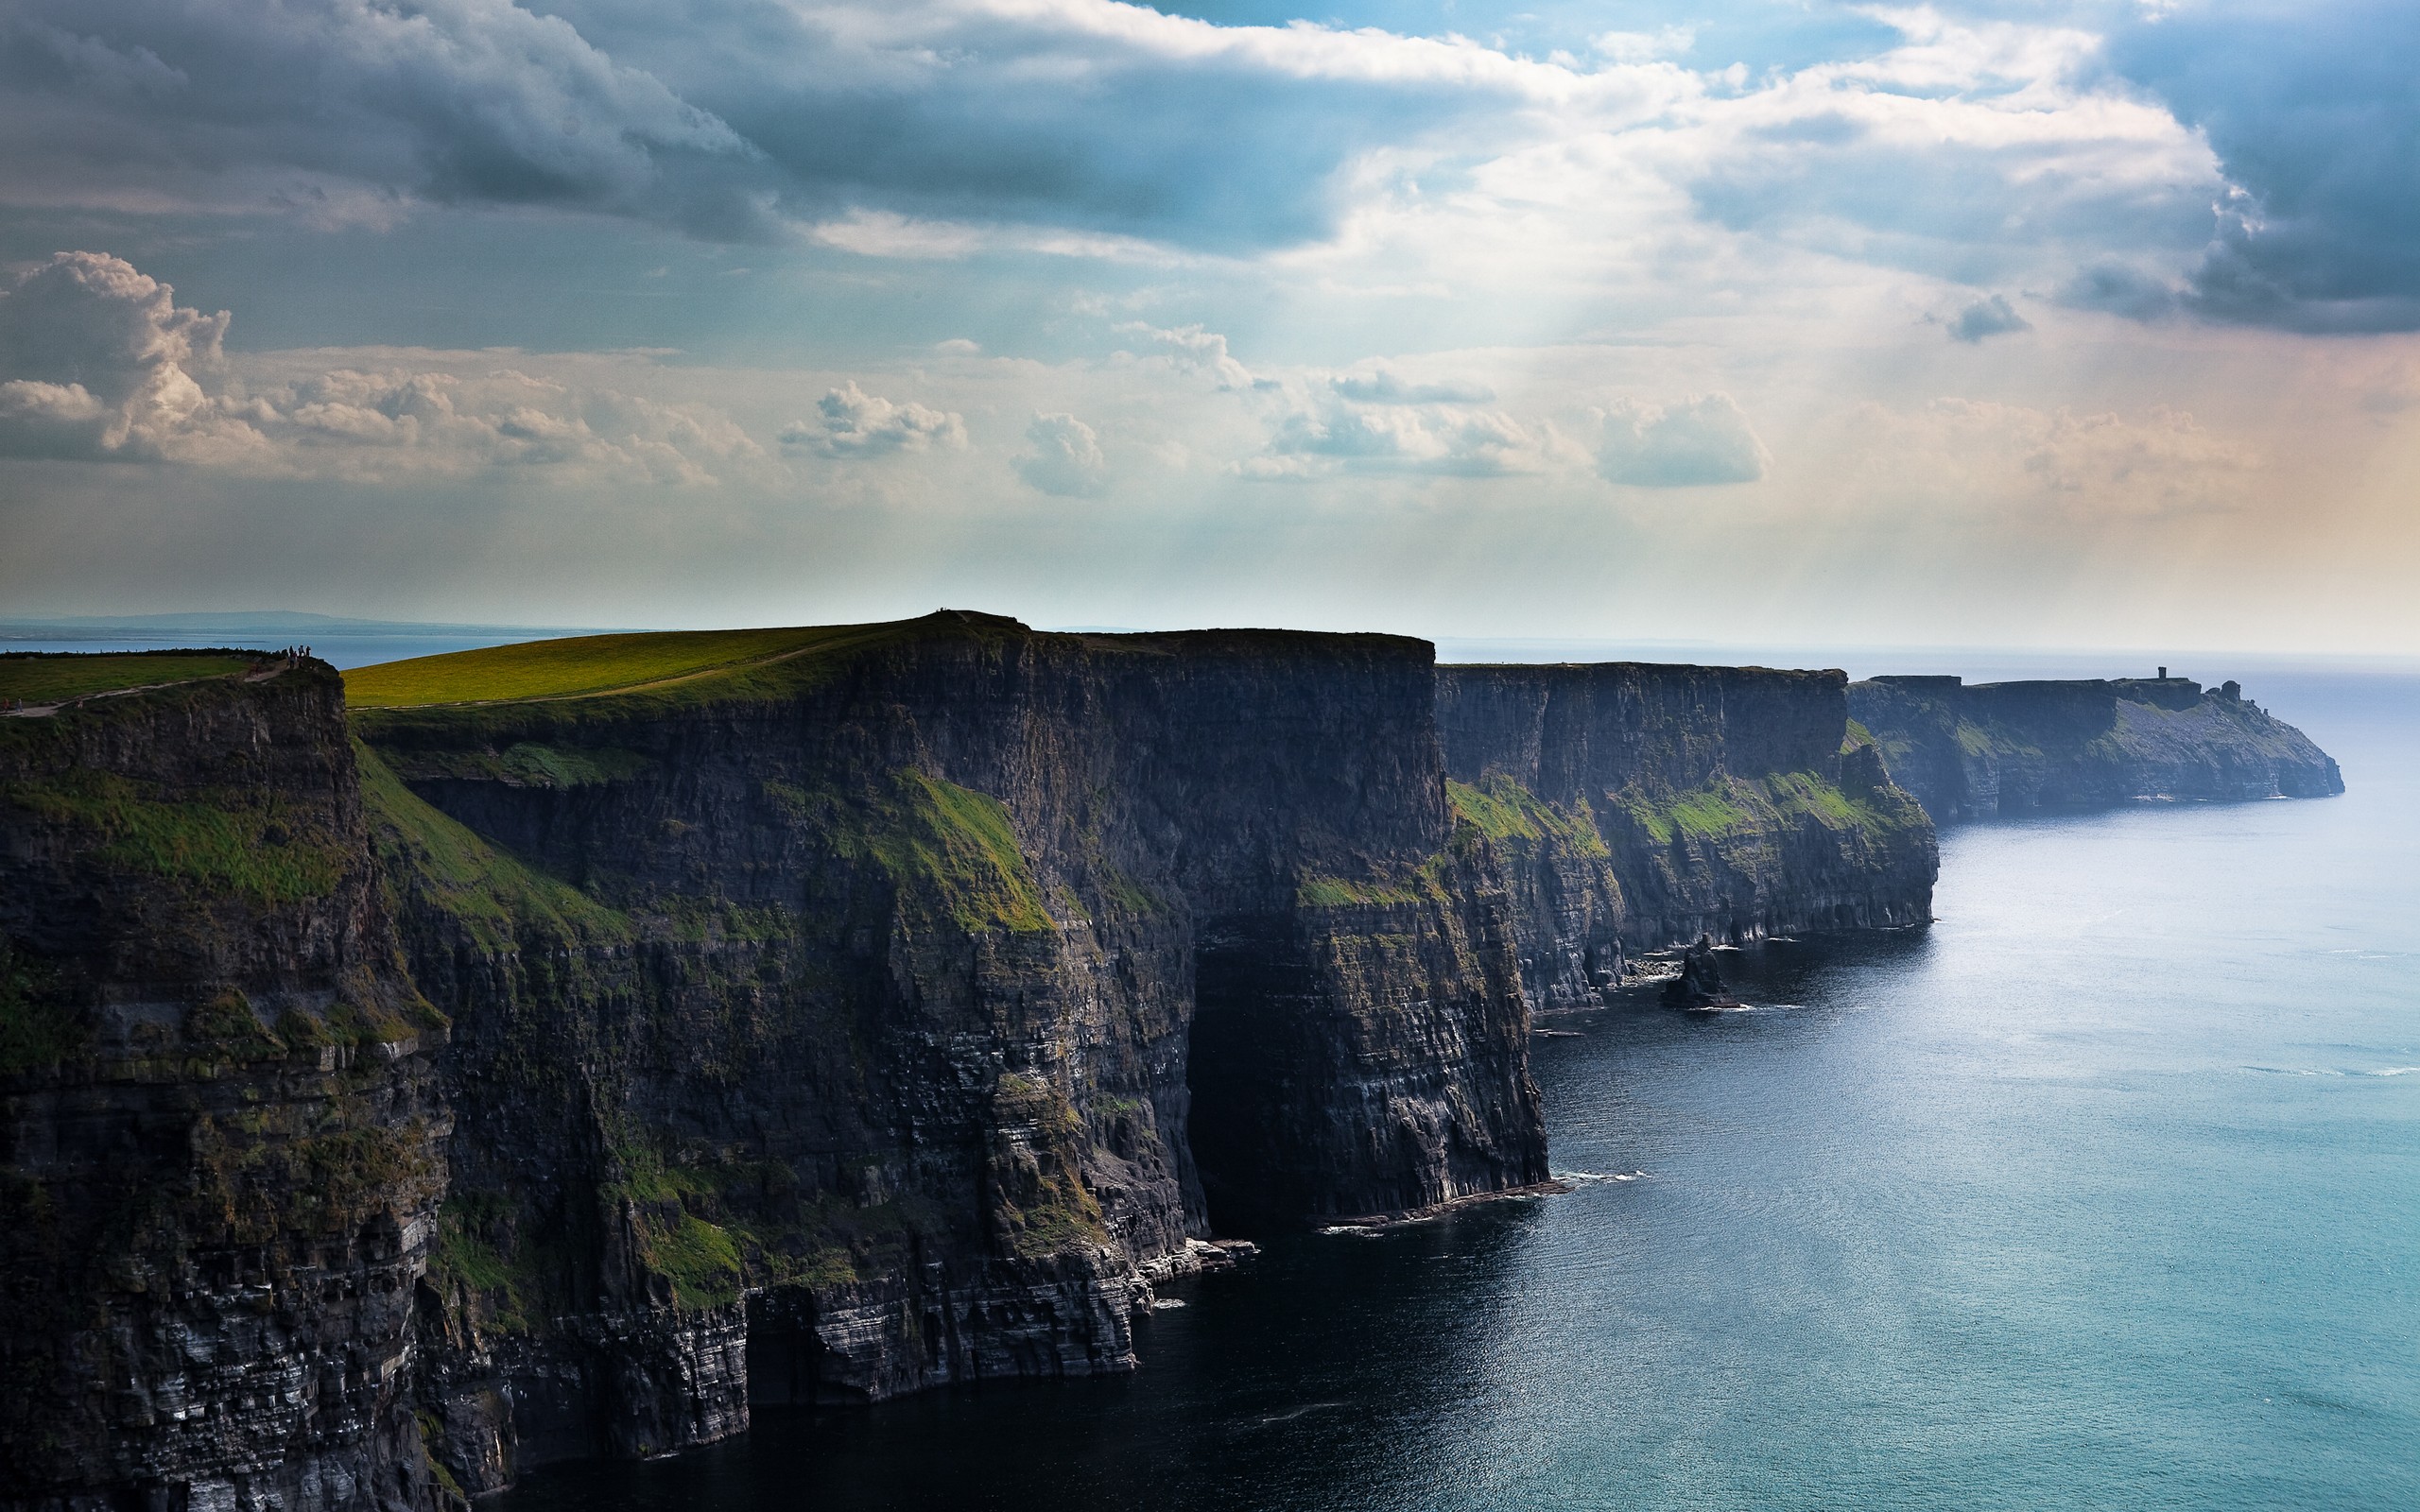 General 2560x1600 cliff nature Ireland clouds sea Cliffs of Moher